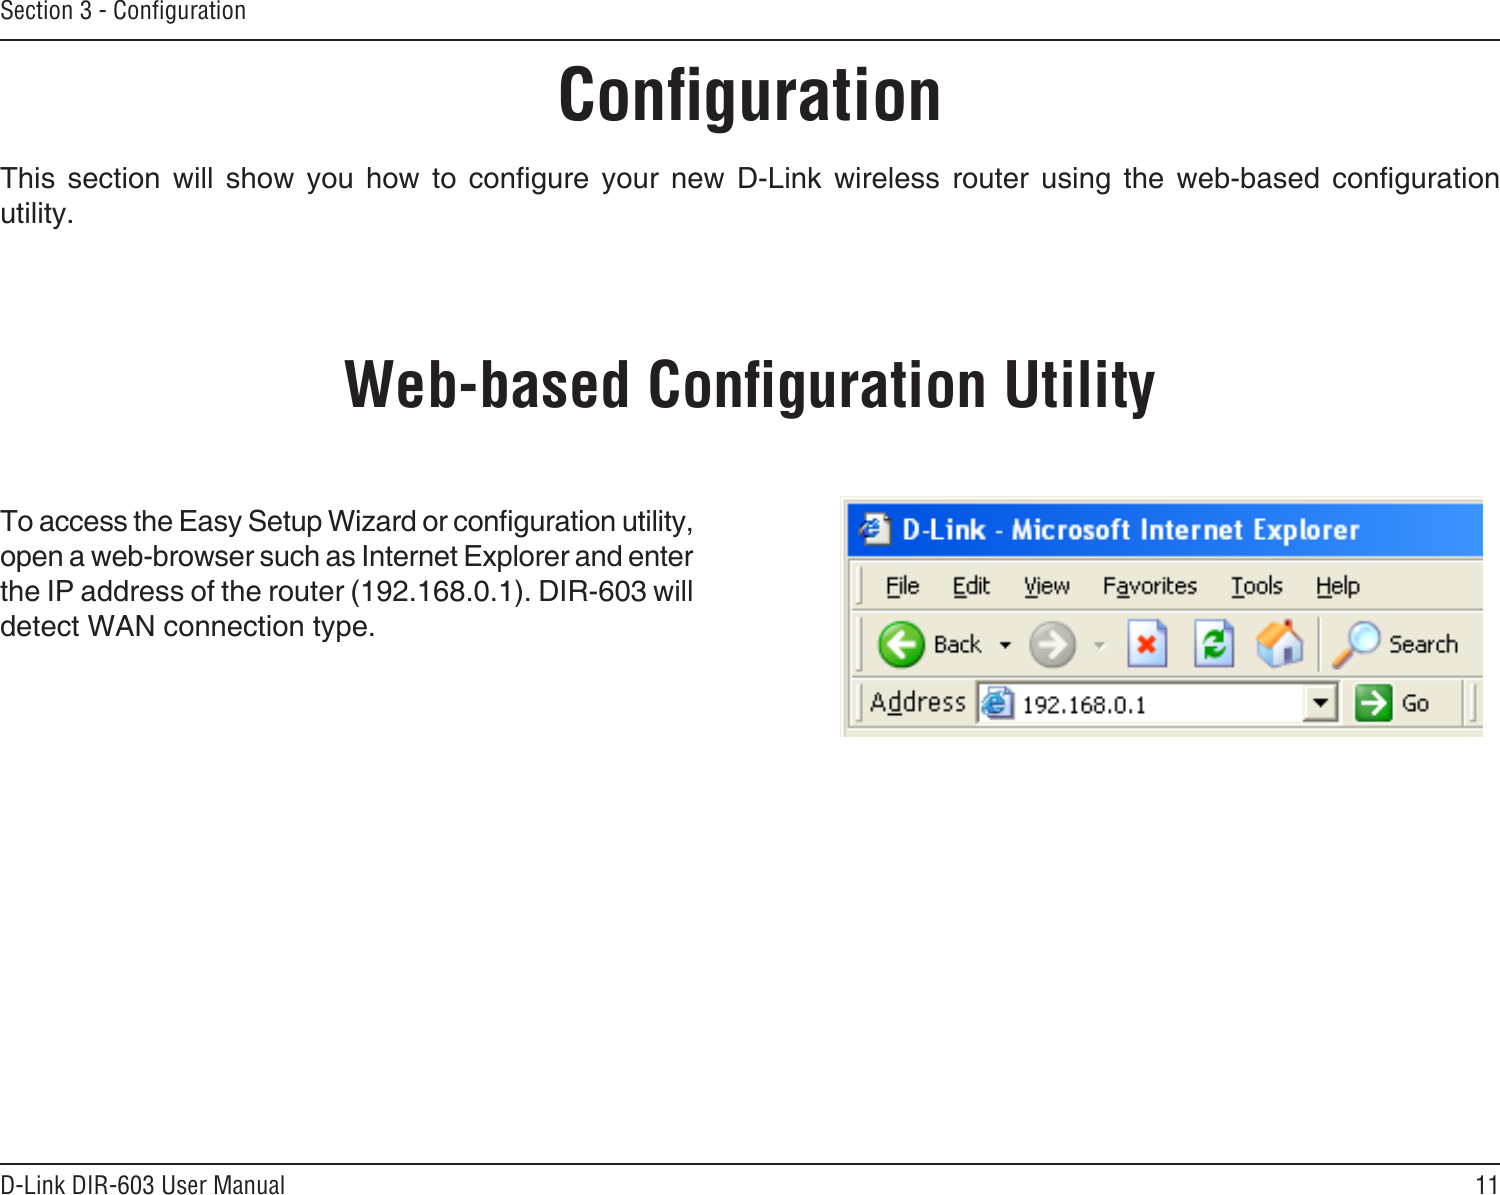 11D-Link DIR-603 User ManualSection 3 - CongurationCongurationThis  section  will  show  you  how  to  congure  your  new  D-Link  wireless  router  using  the  web-based  conguration utility.Web-based Conguration UtilityTo access the Easy Setup Wizard or conguration utility, open a web-browser such as Internet Explorer and enter the IP address of the router (192.168.0.1). DIR-603 will detect WAN connection type.